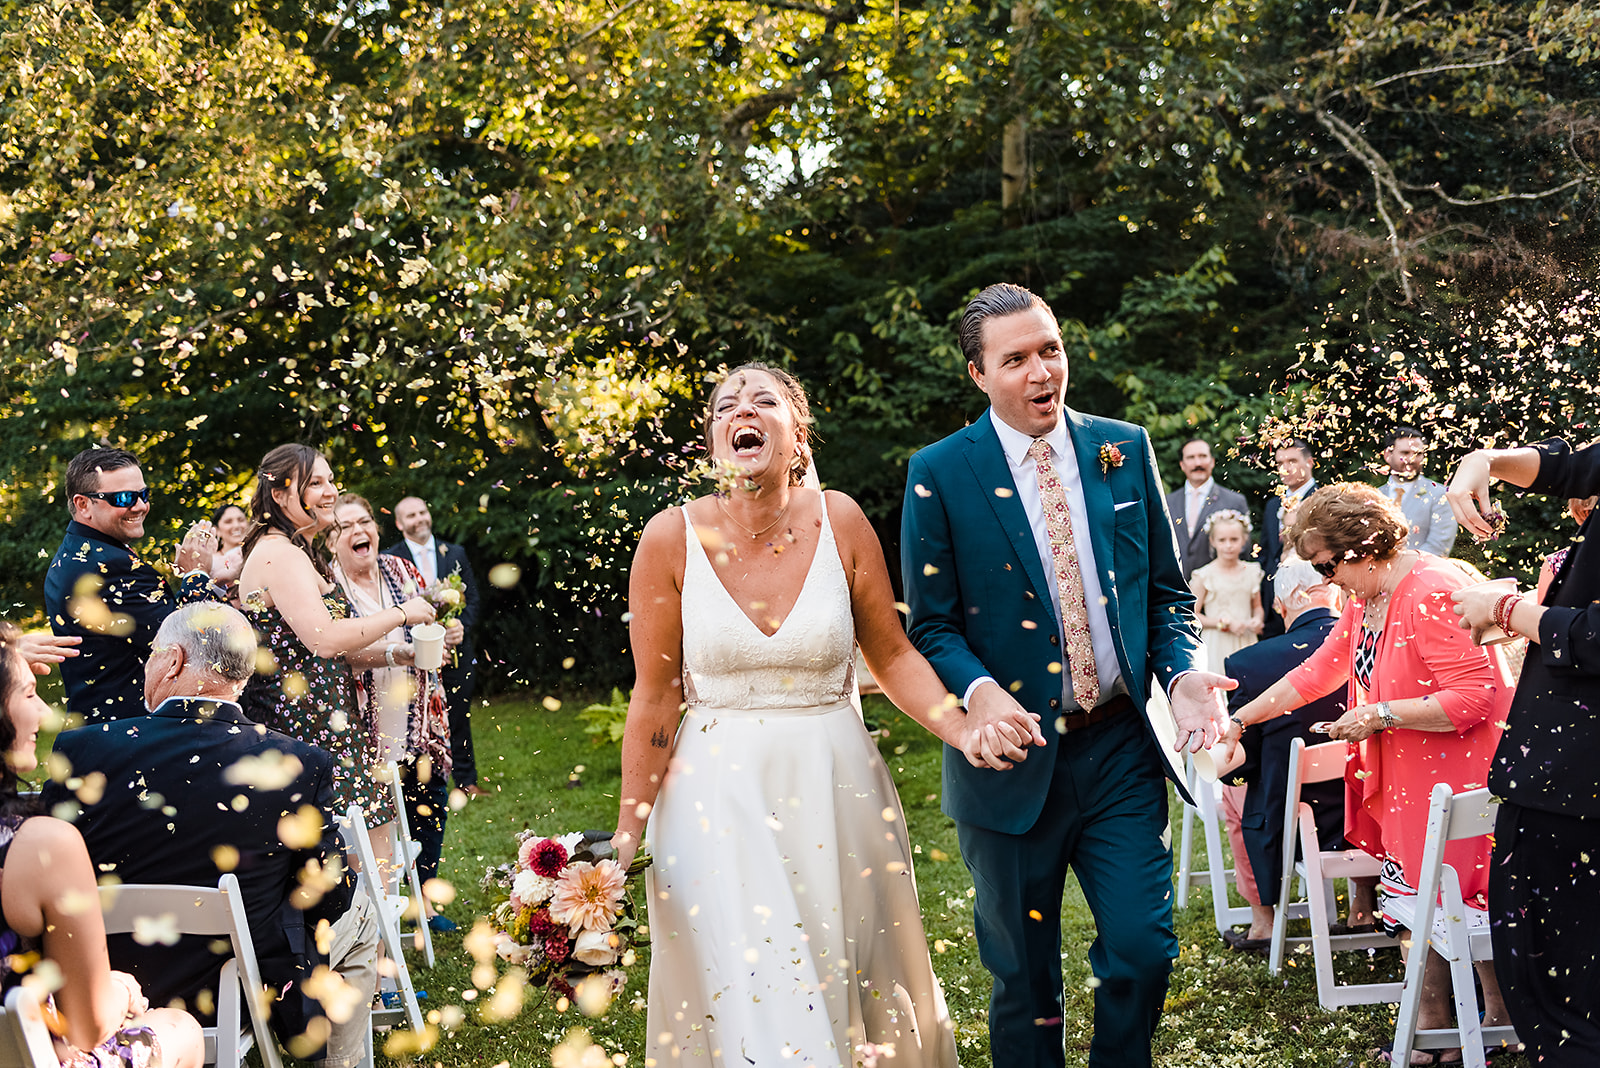 Bride and groom exit ceremony at Awbury Arboretum wedding under a shower of eco-friendly dried flower confetti